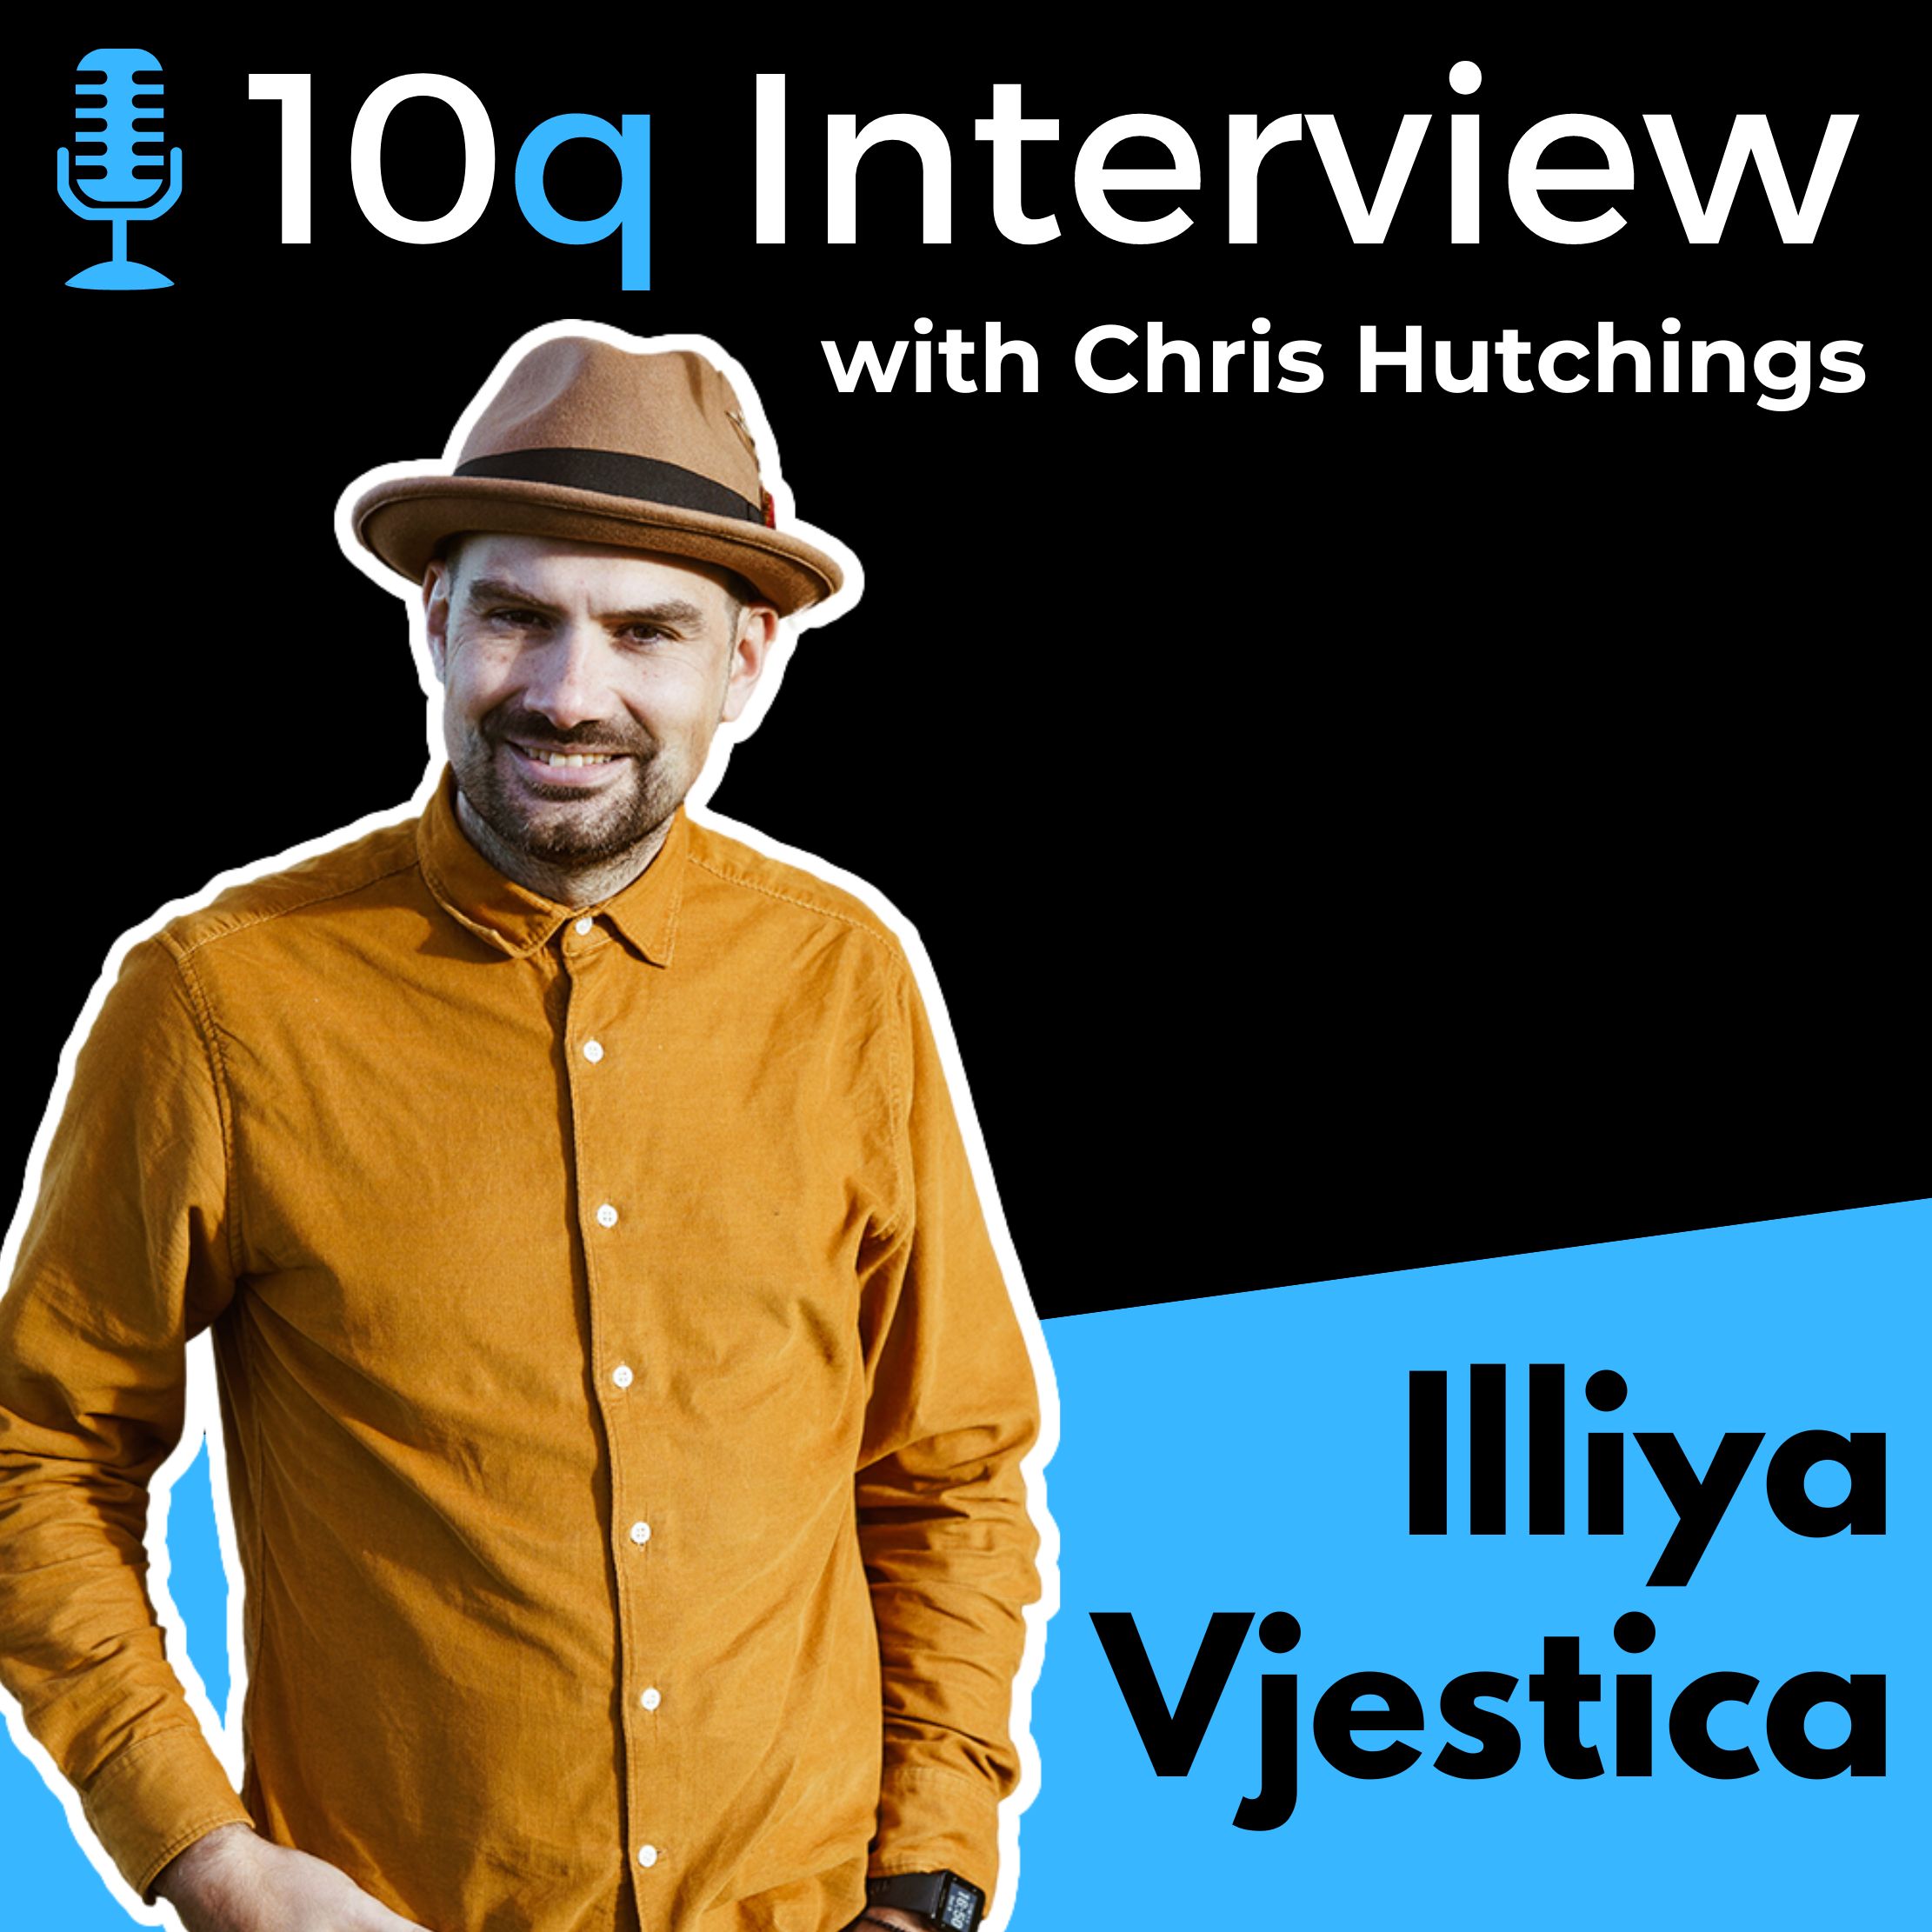 Artwork for podcast 10q Interview with Chris Hutchings